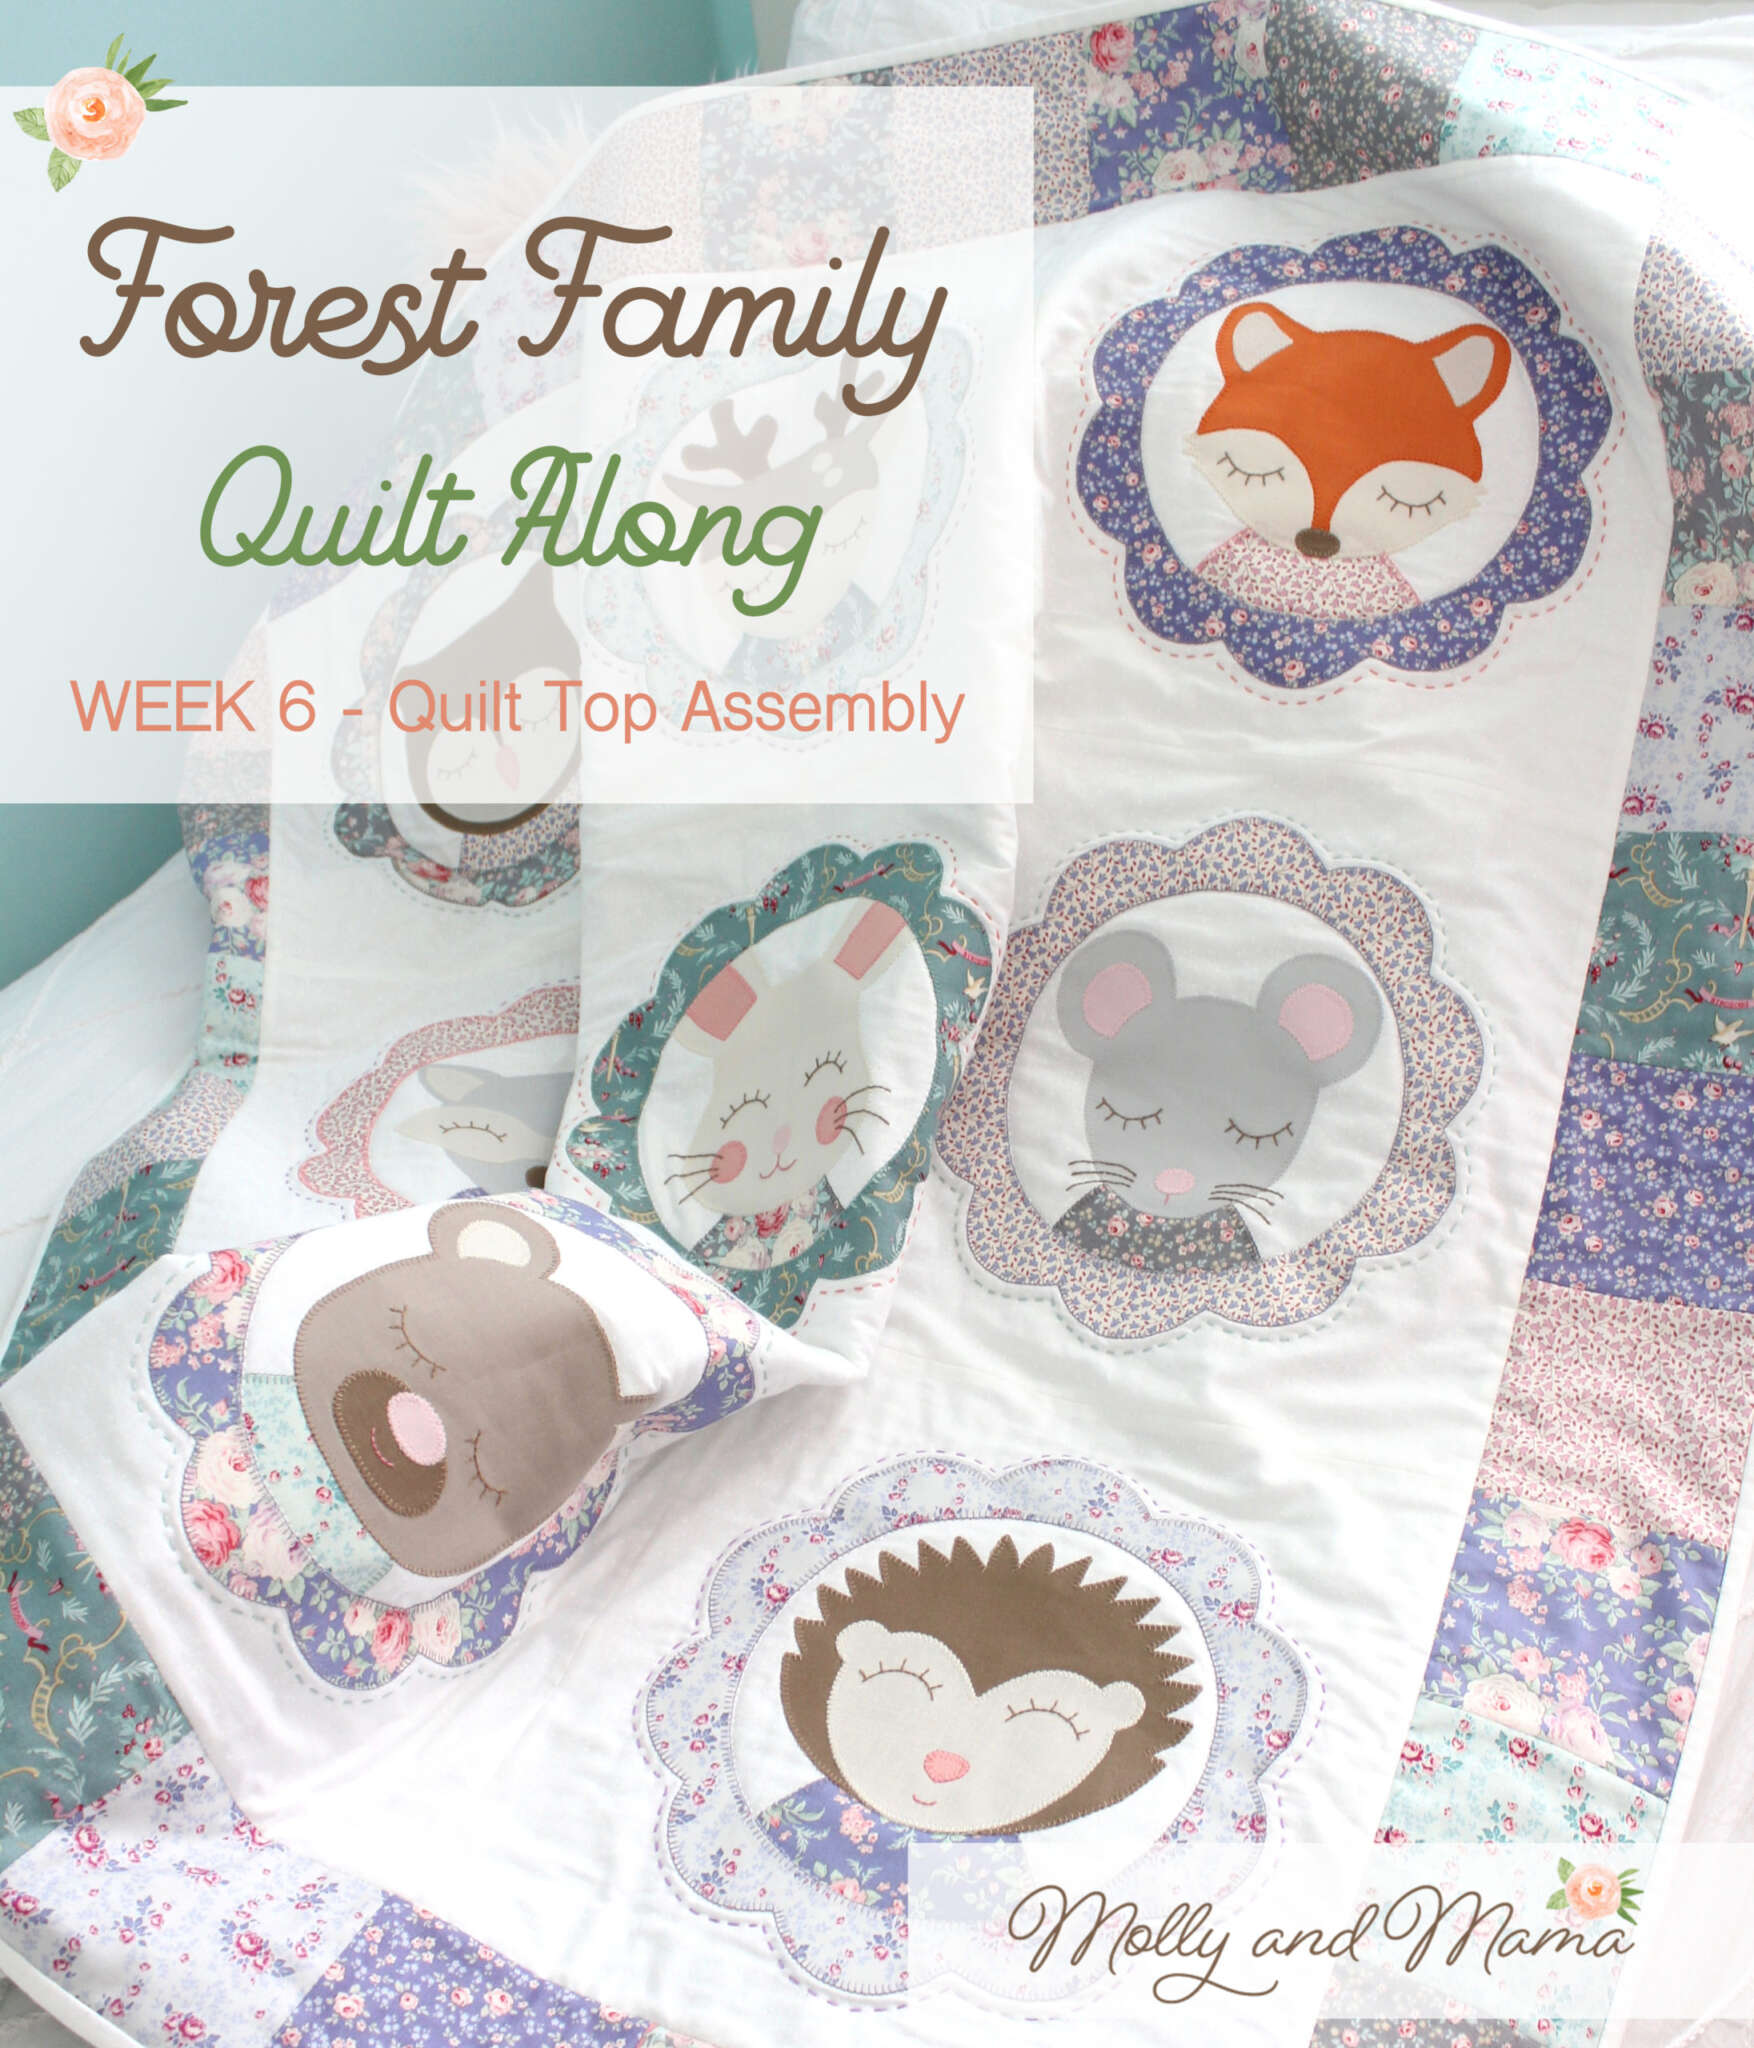 Week 6 – Forest Family Quilt Along